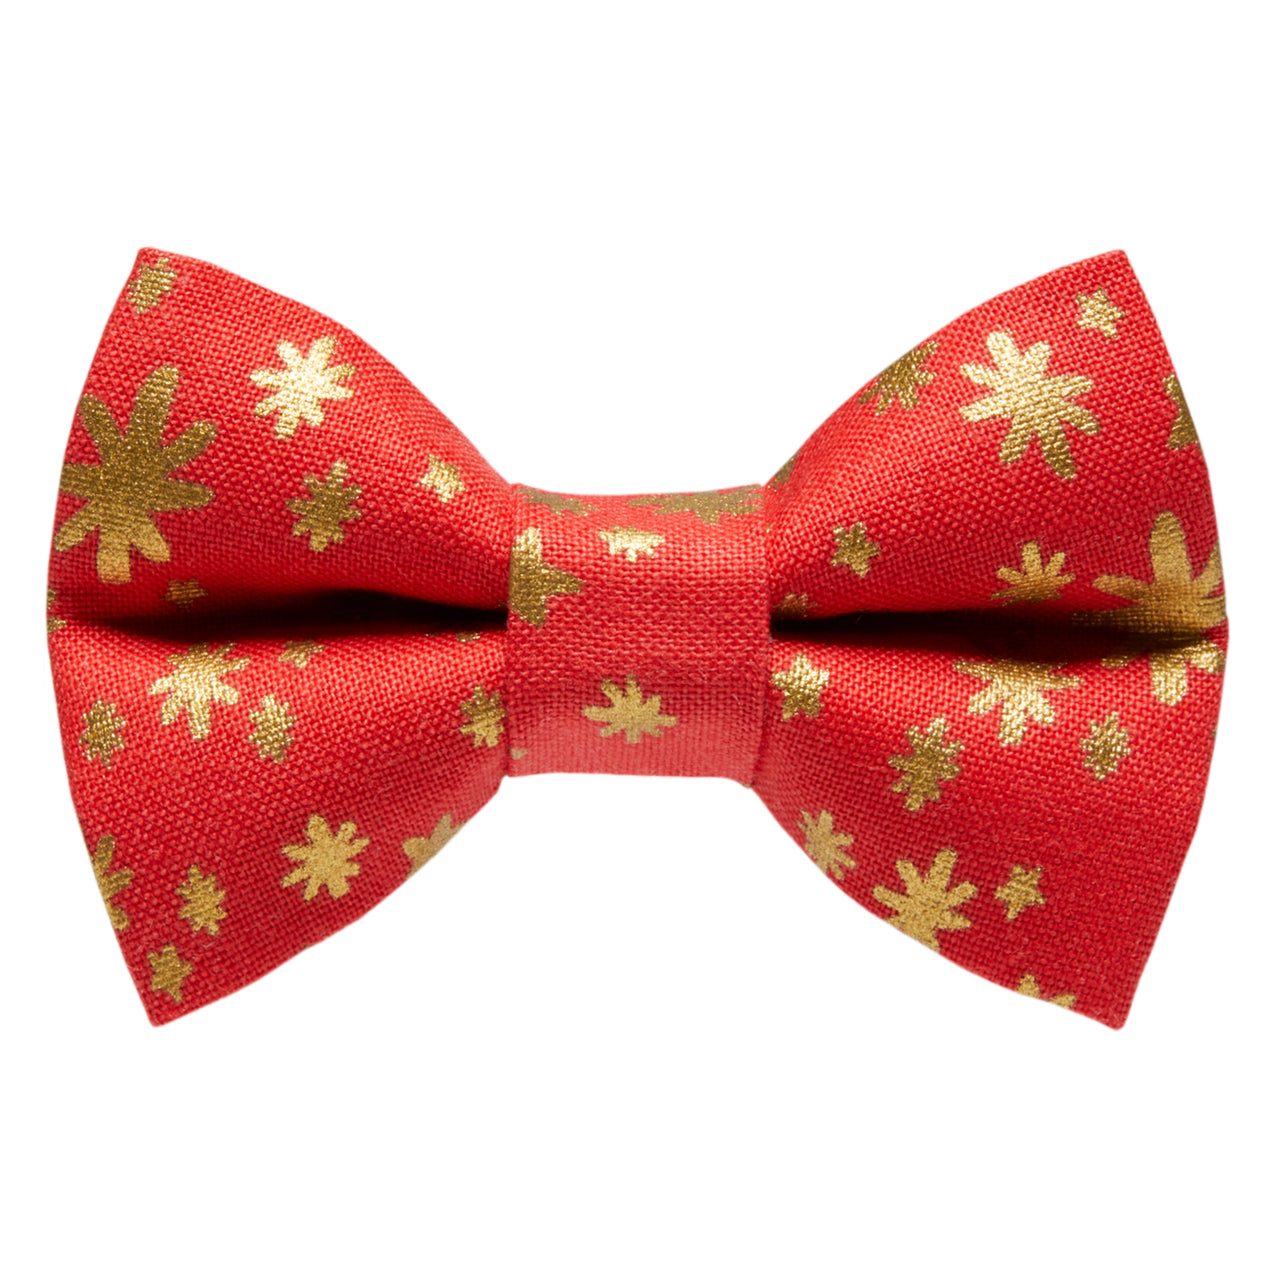 The All Is Bright - Cat / Dog Bow Tie